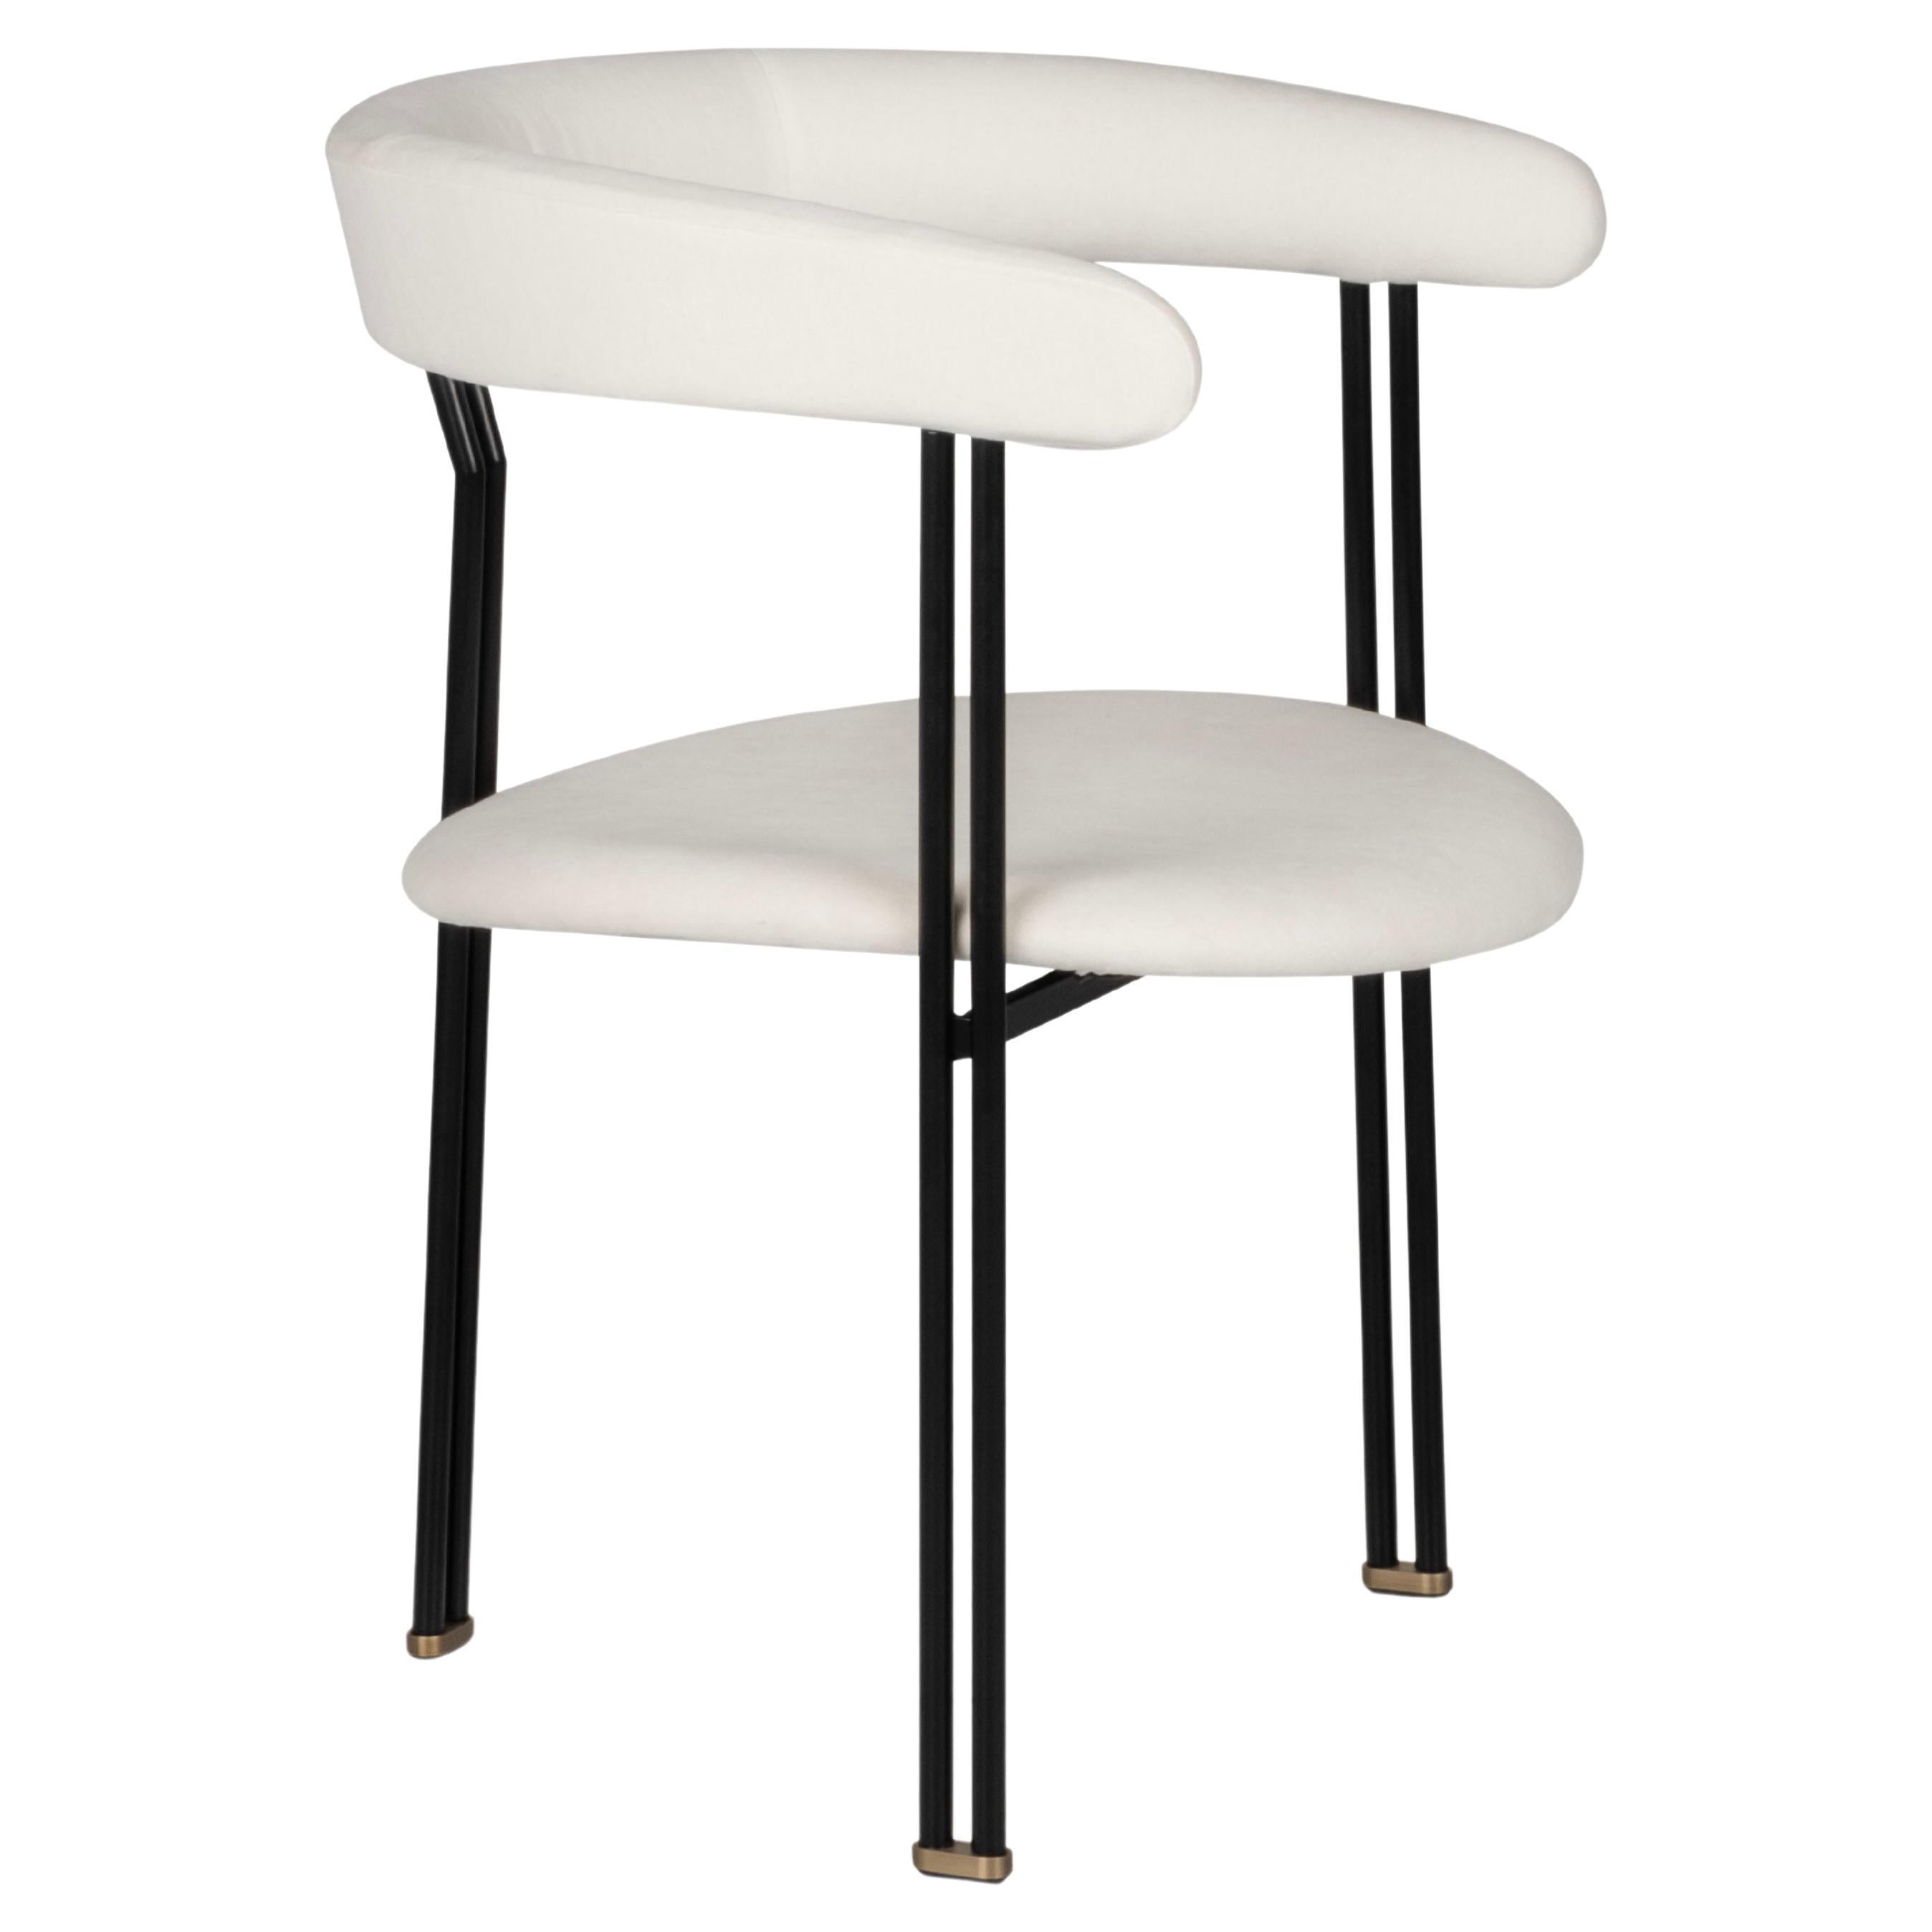 Modern Maia Dining Chairs, White HOLLY HUNT, Handmade in Portugal by Greenapple For Sale